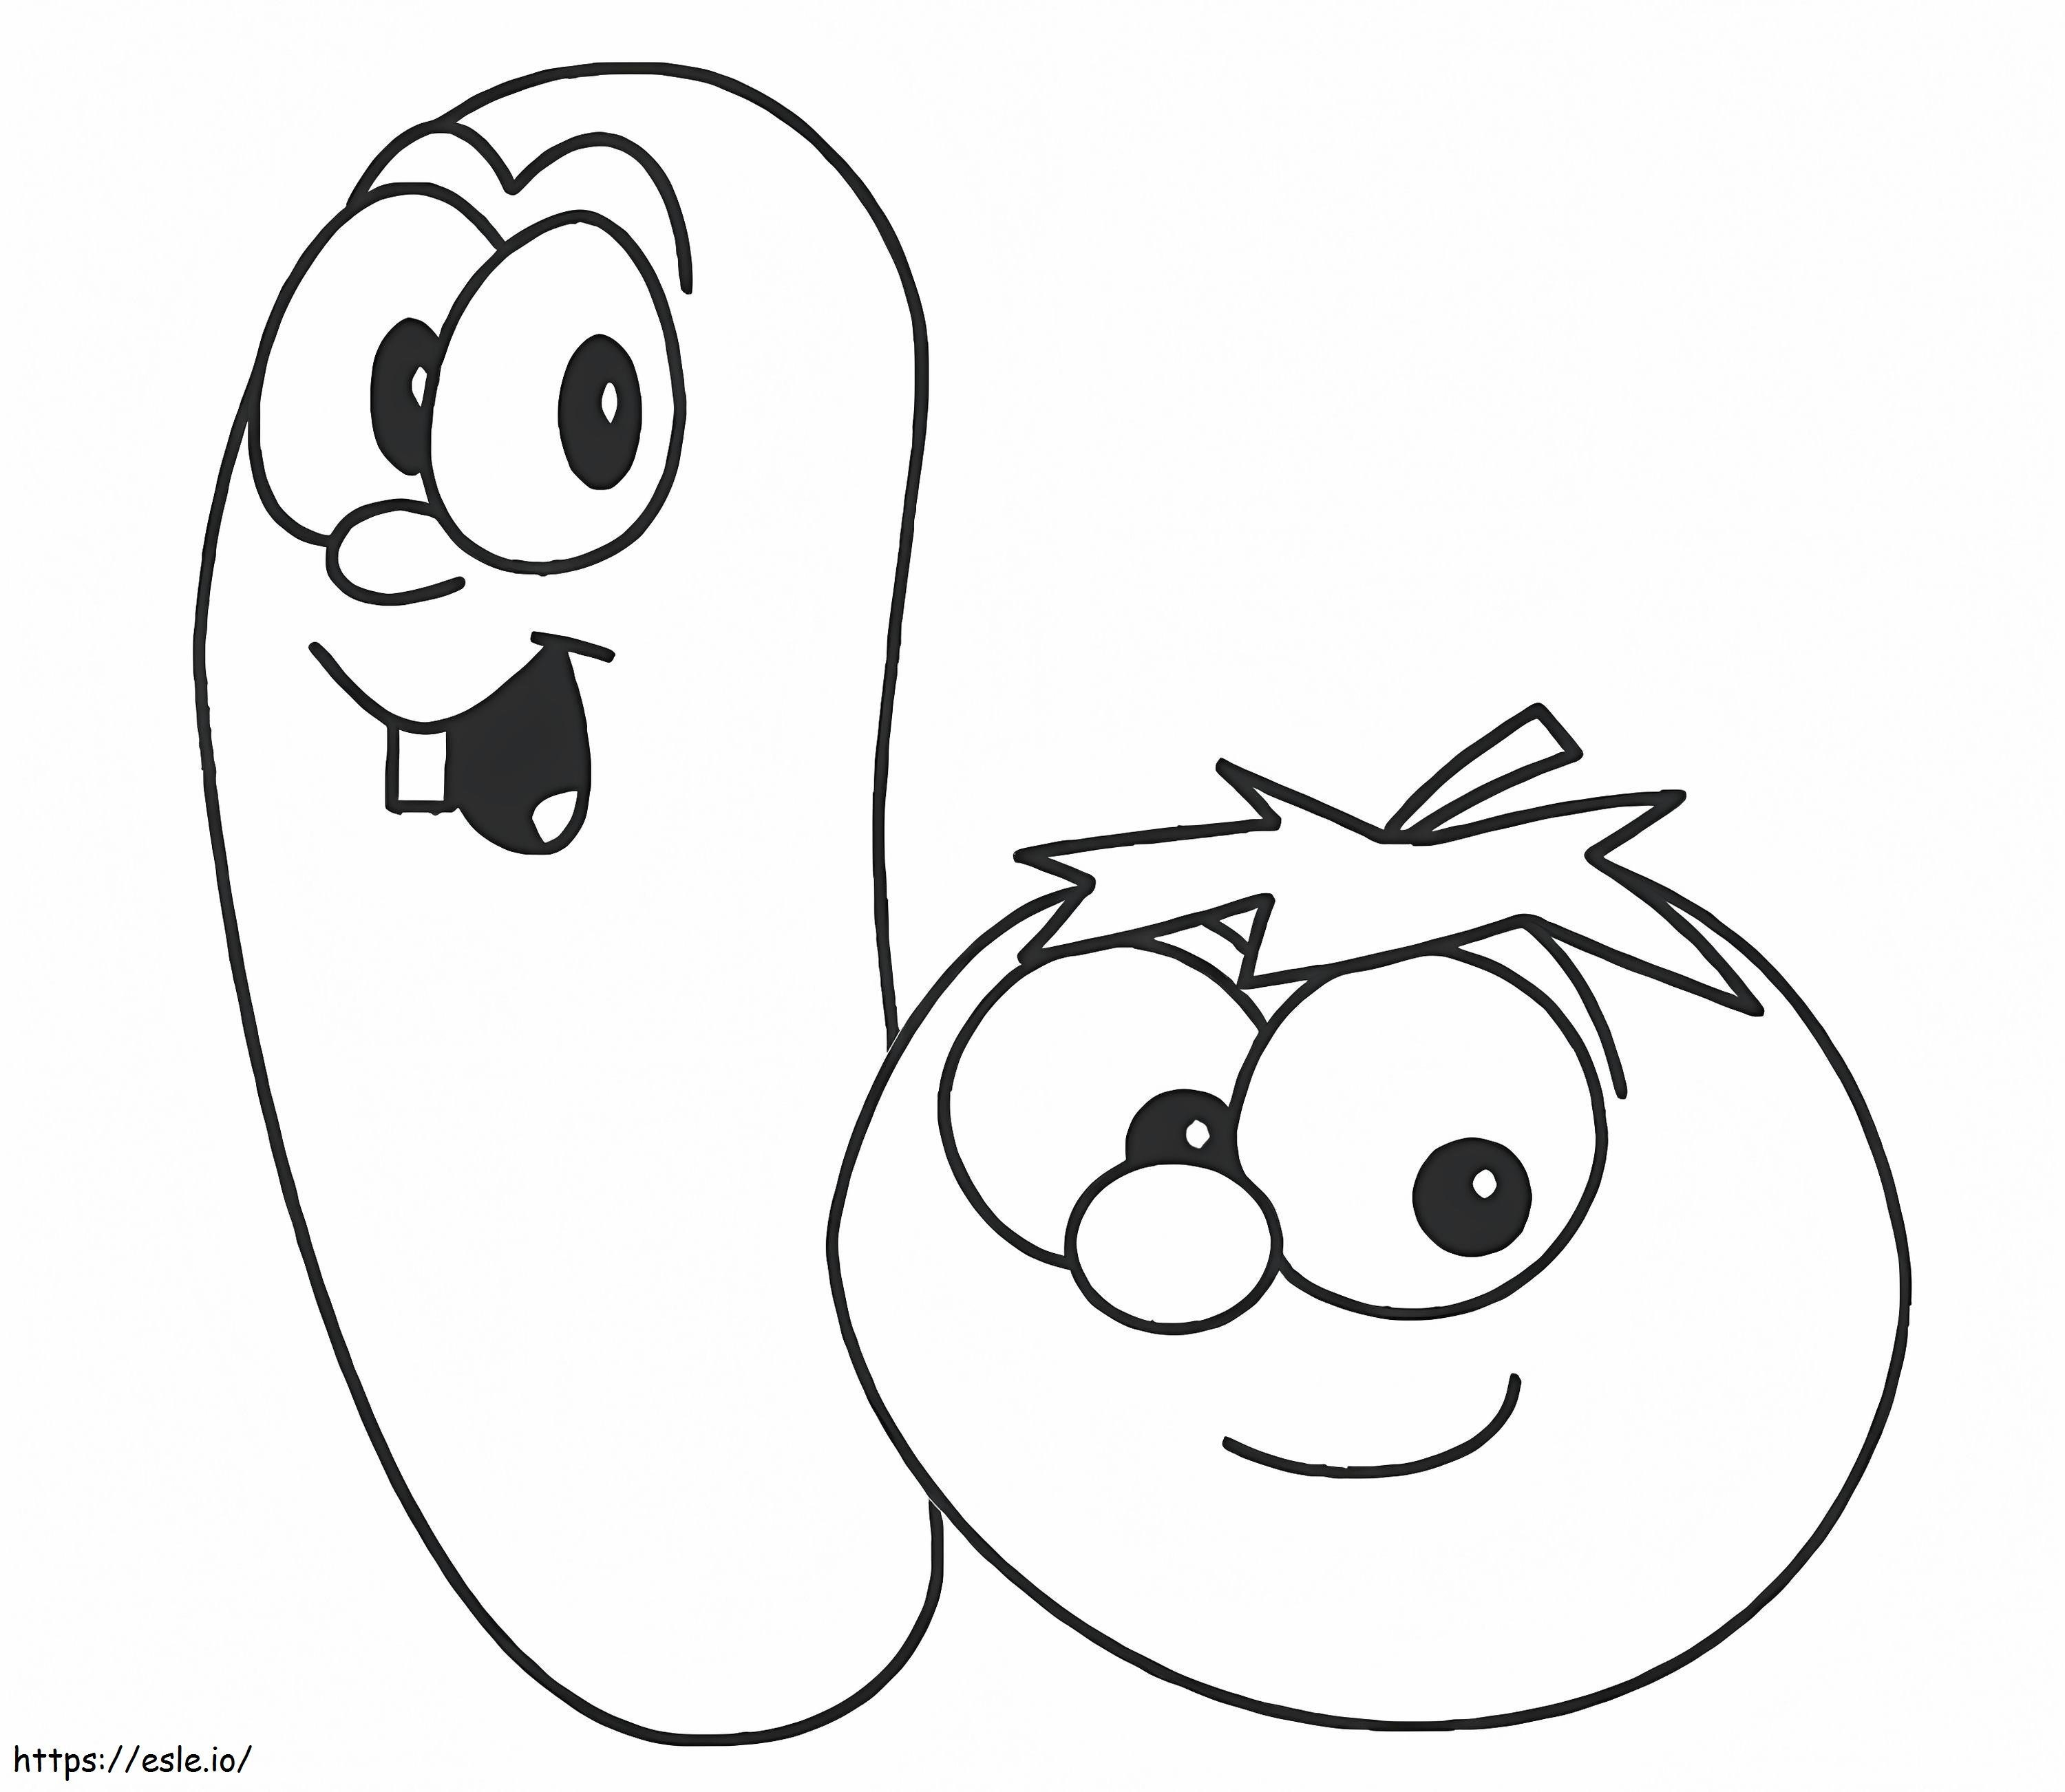 Cucumber And Tomato Cartoon coloring page